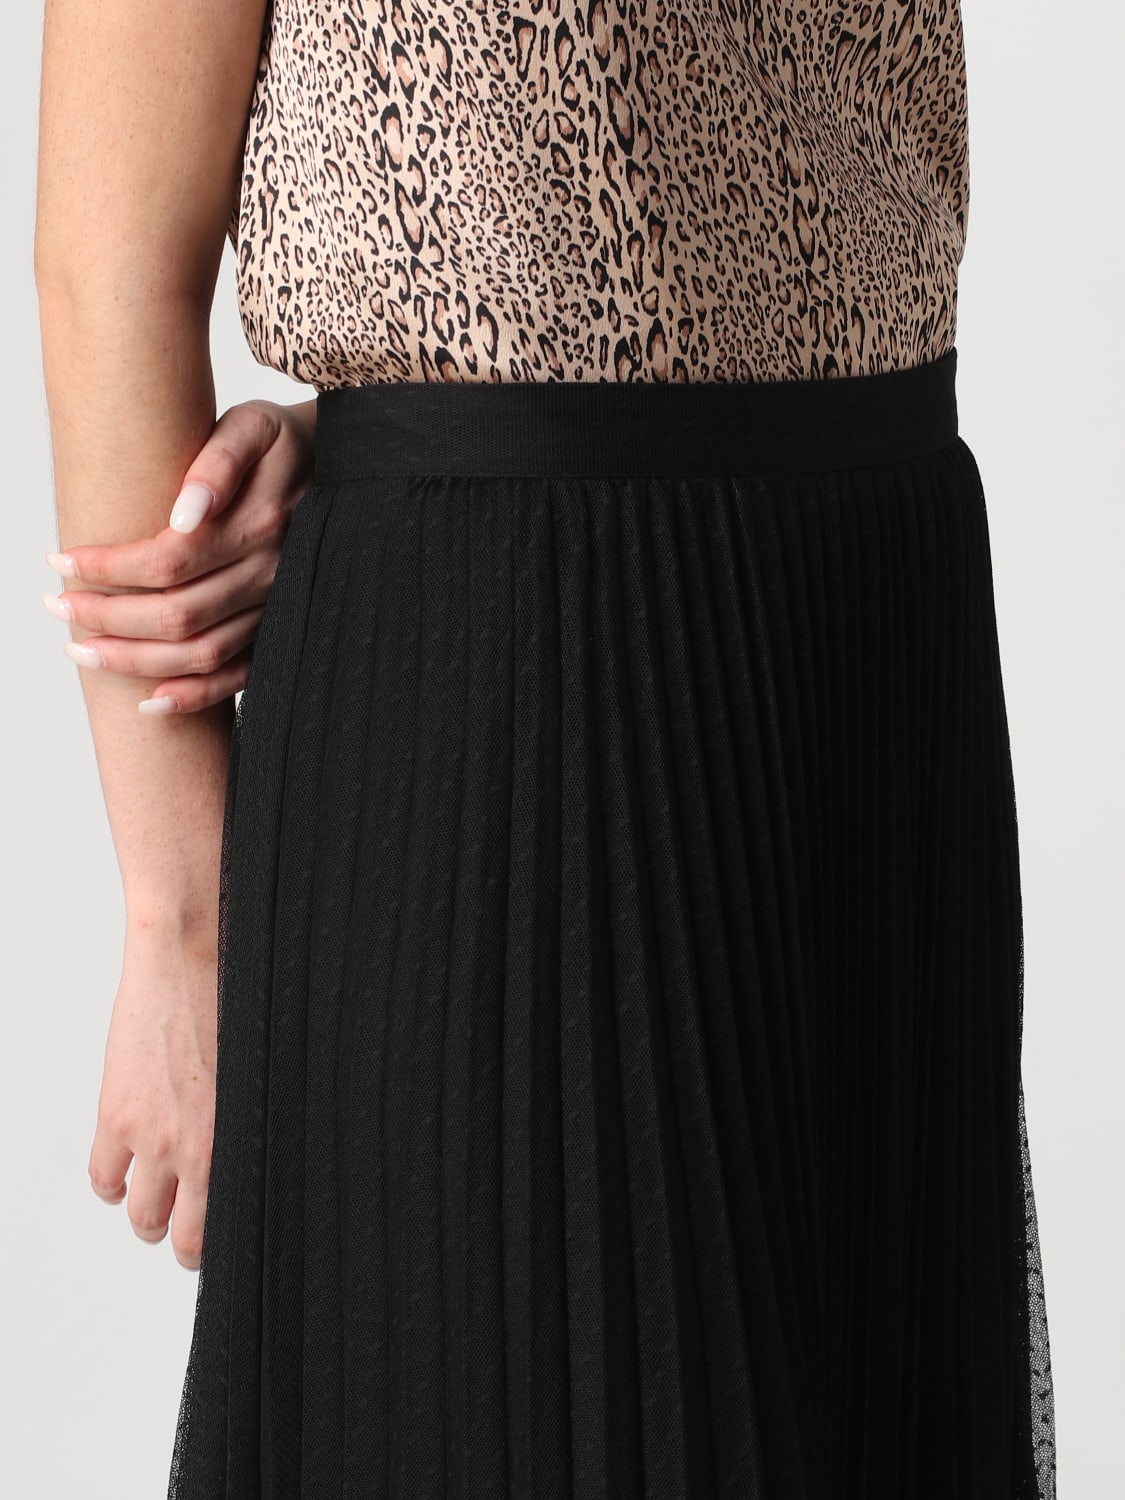 Twinset Womens Skirt Black Twinset Skirt 232tp2780 Online At Gigliocom 8079